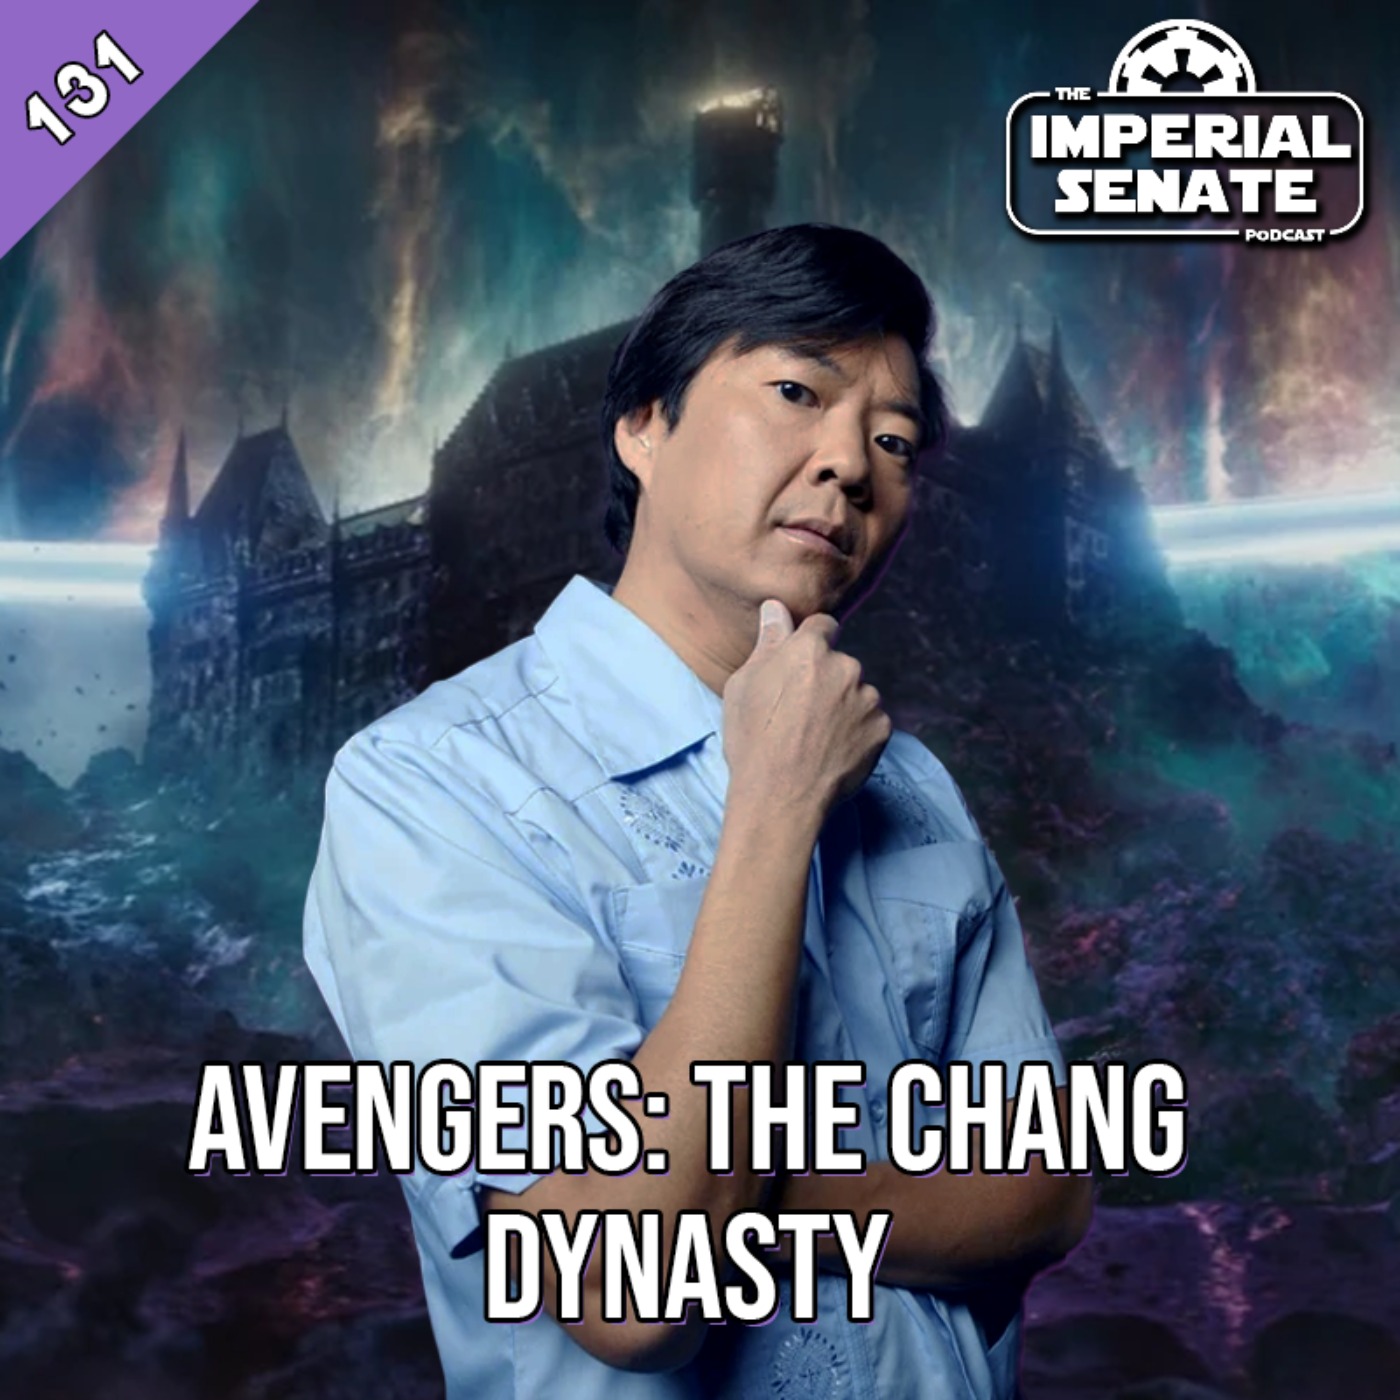 The Imperial Senate Podcast: Episode 131 - Avengers, The Chang Dynasty